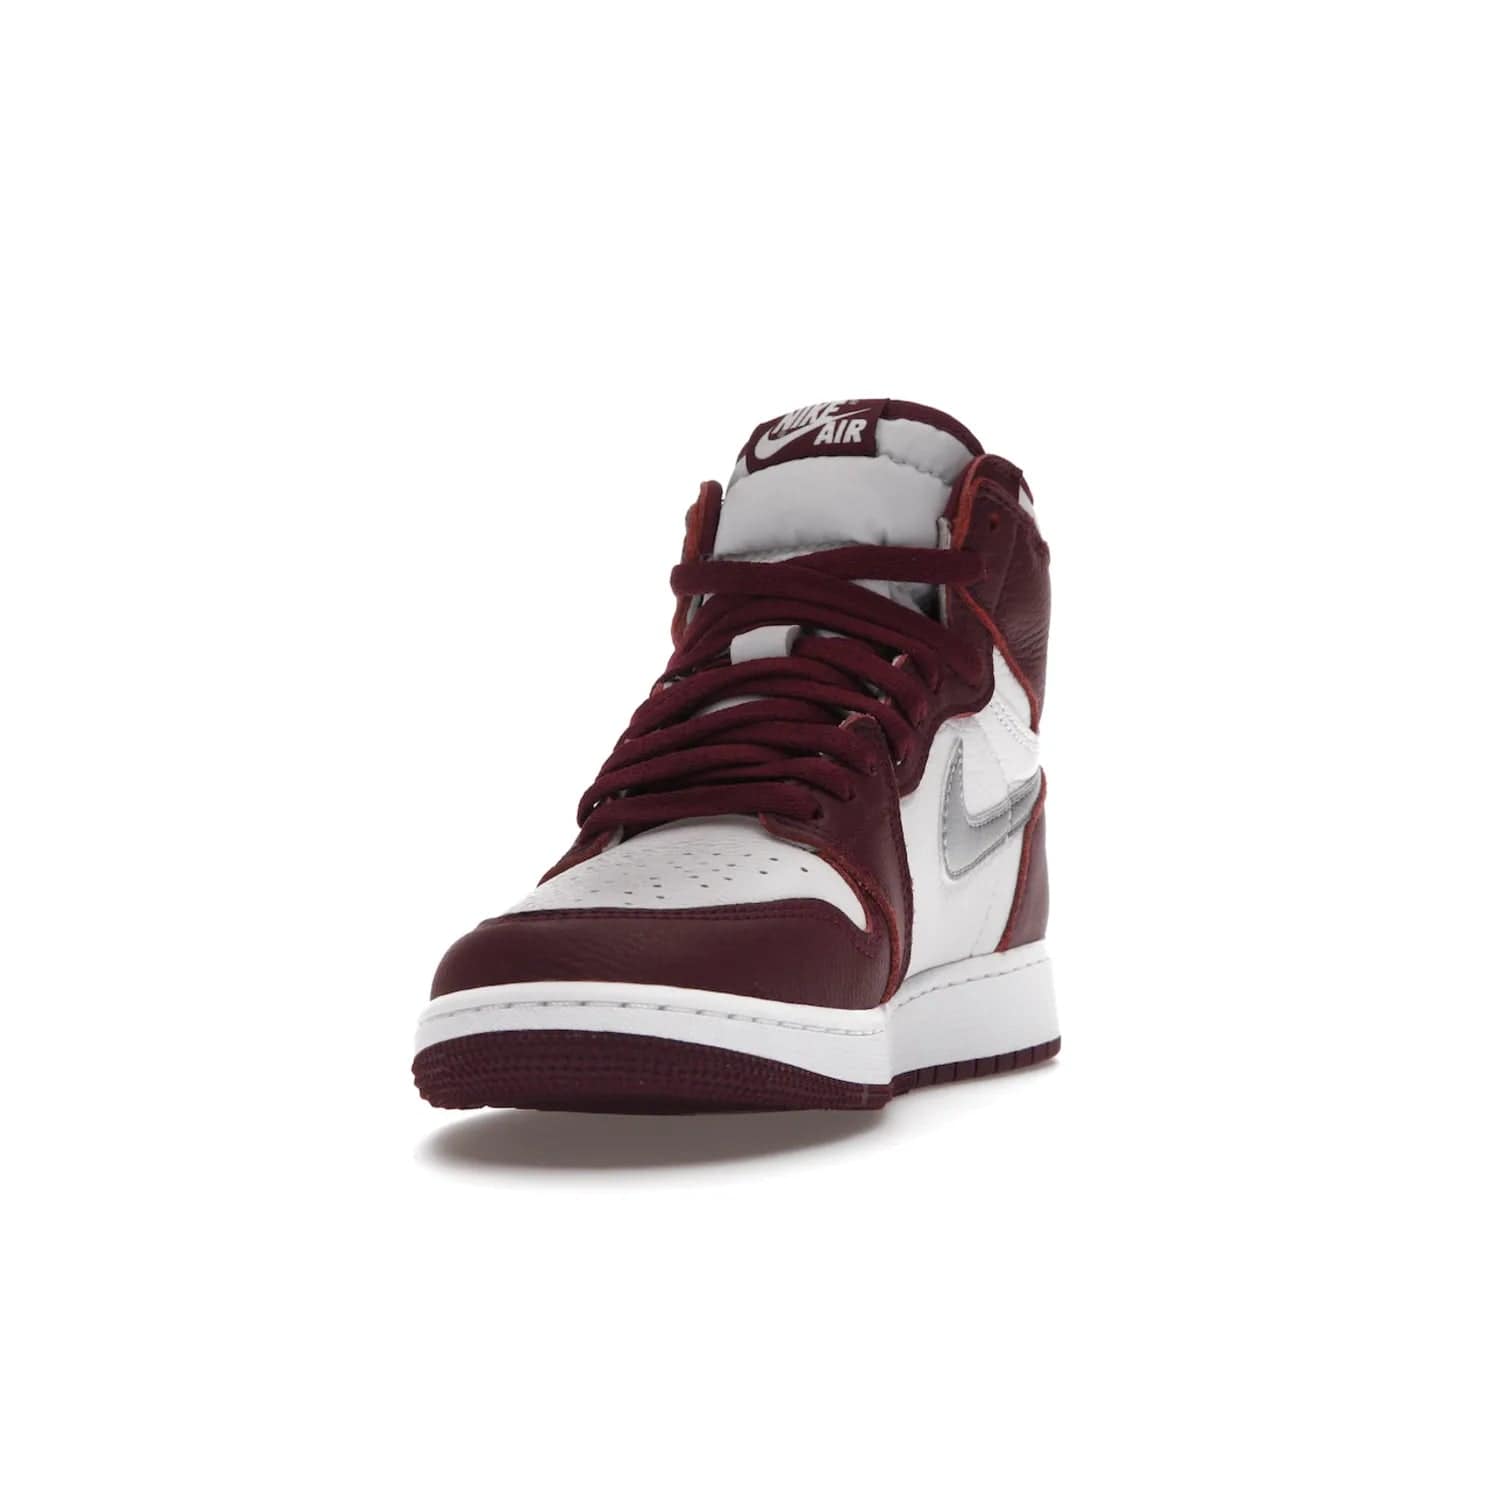 Jordan 1 Retro High OG Bordeaux (GS) - Image 12 - Only at www.BallersClubKickz.com - #
Introducing the Air Jordan 1 Retro High OG Bordeaux GS – a signature colorway part of the Jordan Brand Fall 2021 lineup. White leather upper & Bordeaux overlays, metallic silver swoosh, jeweled Air Jordan Wings logo & more. Step up your style game with this sleek fall season silhouette.